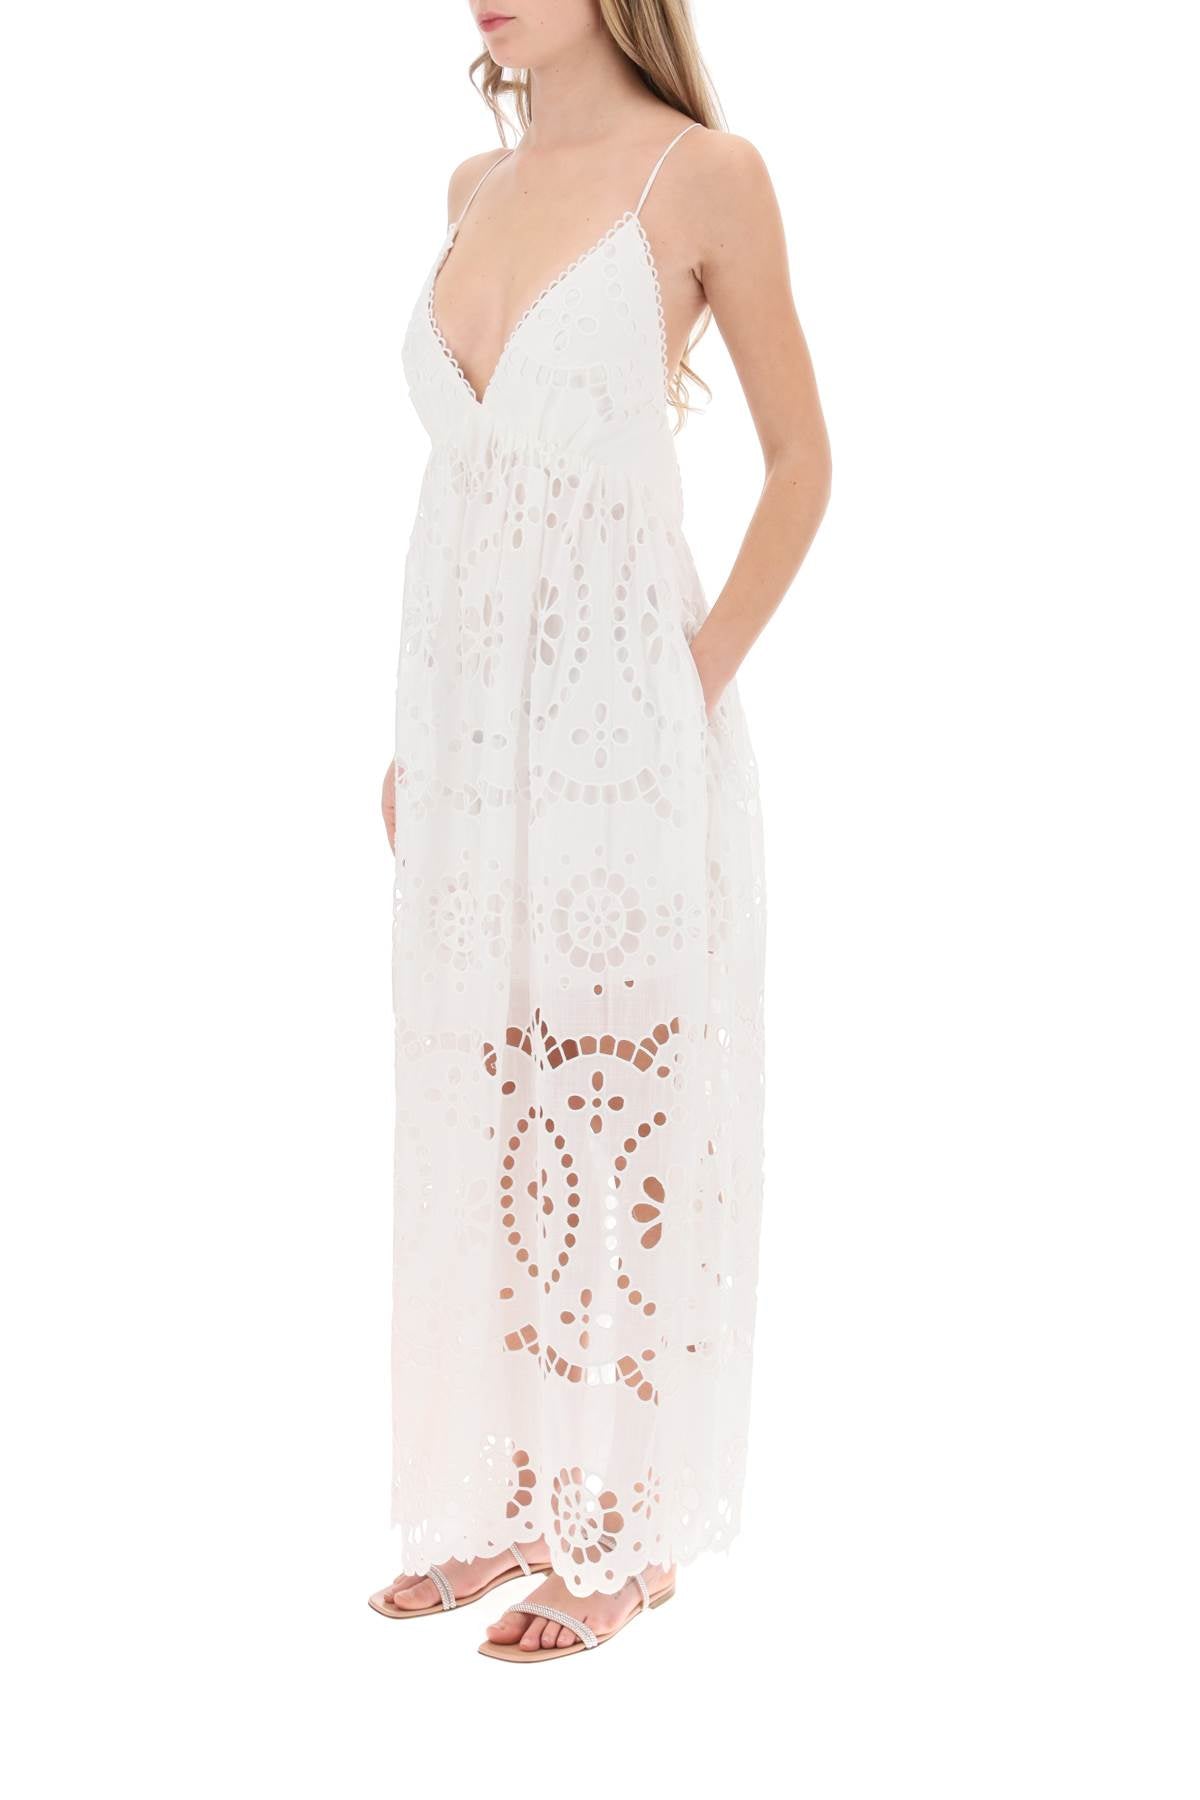 Zimmermann lexi maxi dress in broderie anglaise-3